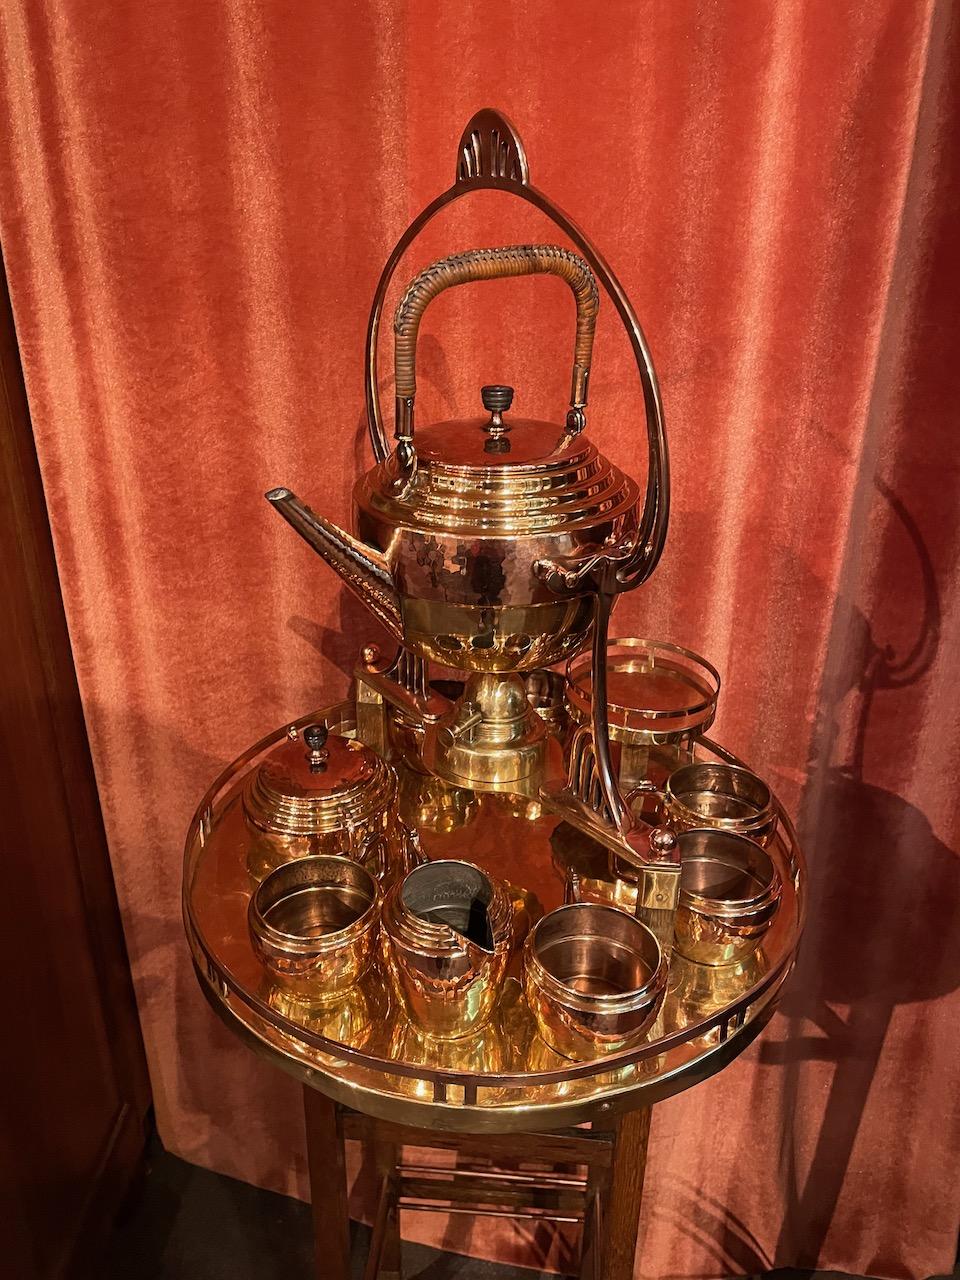 An Art Nouveau complete tea/coffee service in hand-hammered copper and brass on a graceful wooden stand. The set is comprised of a teapot with a woven wicker handle that hangs from a decorative metal arch over a brass chafing unit to keep the tea